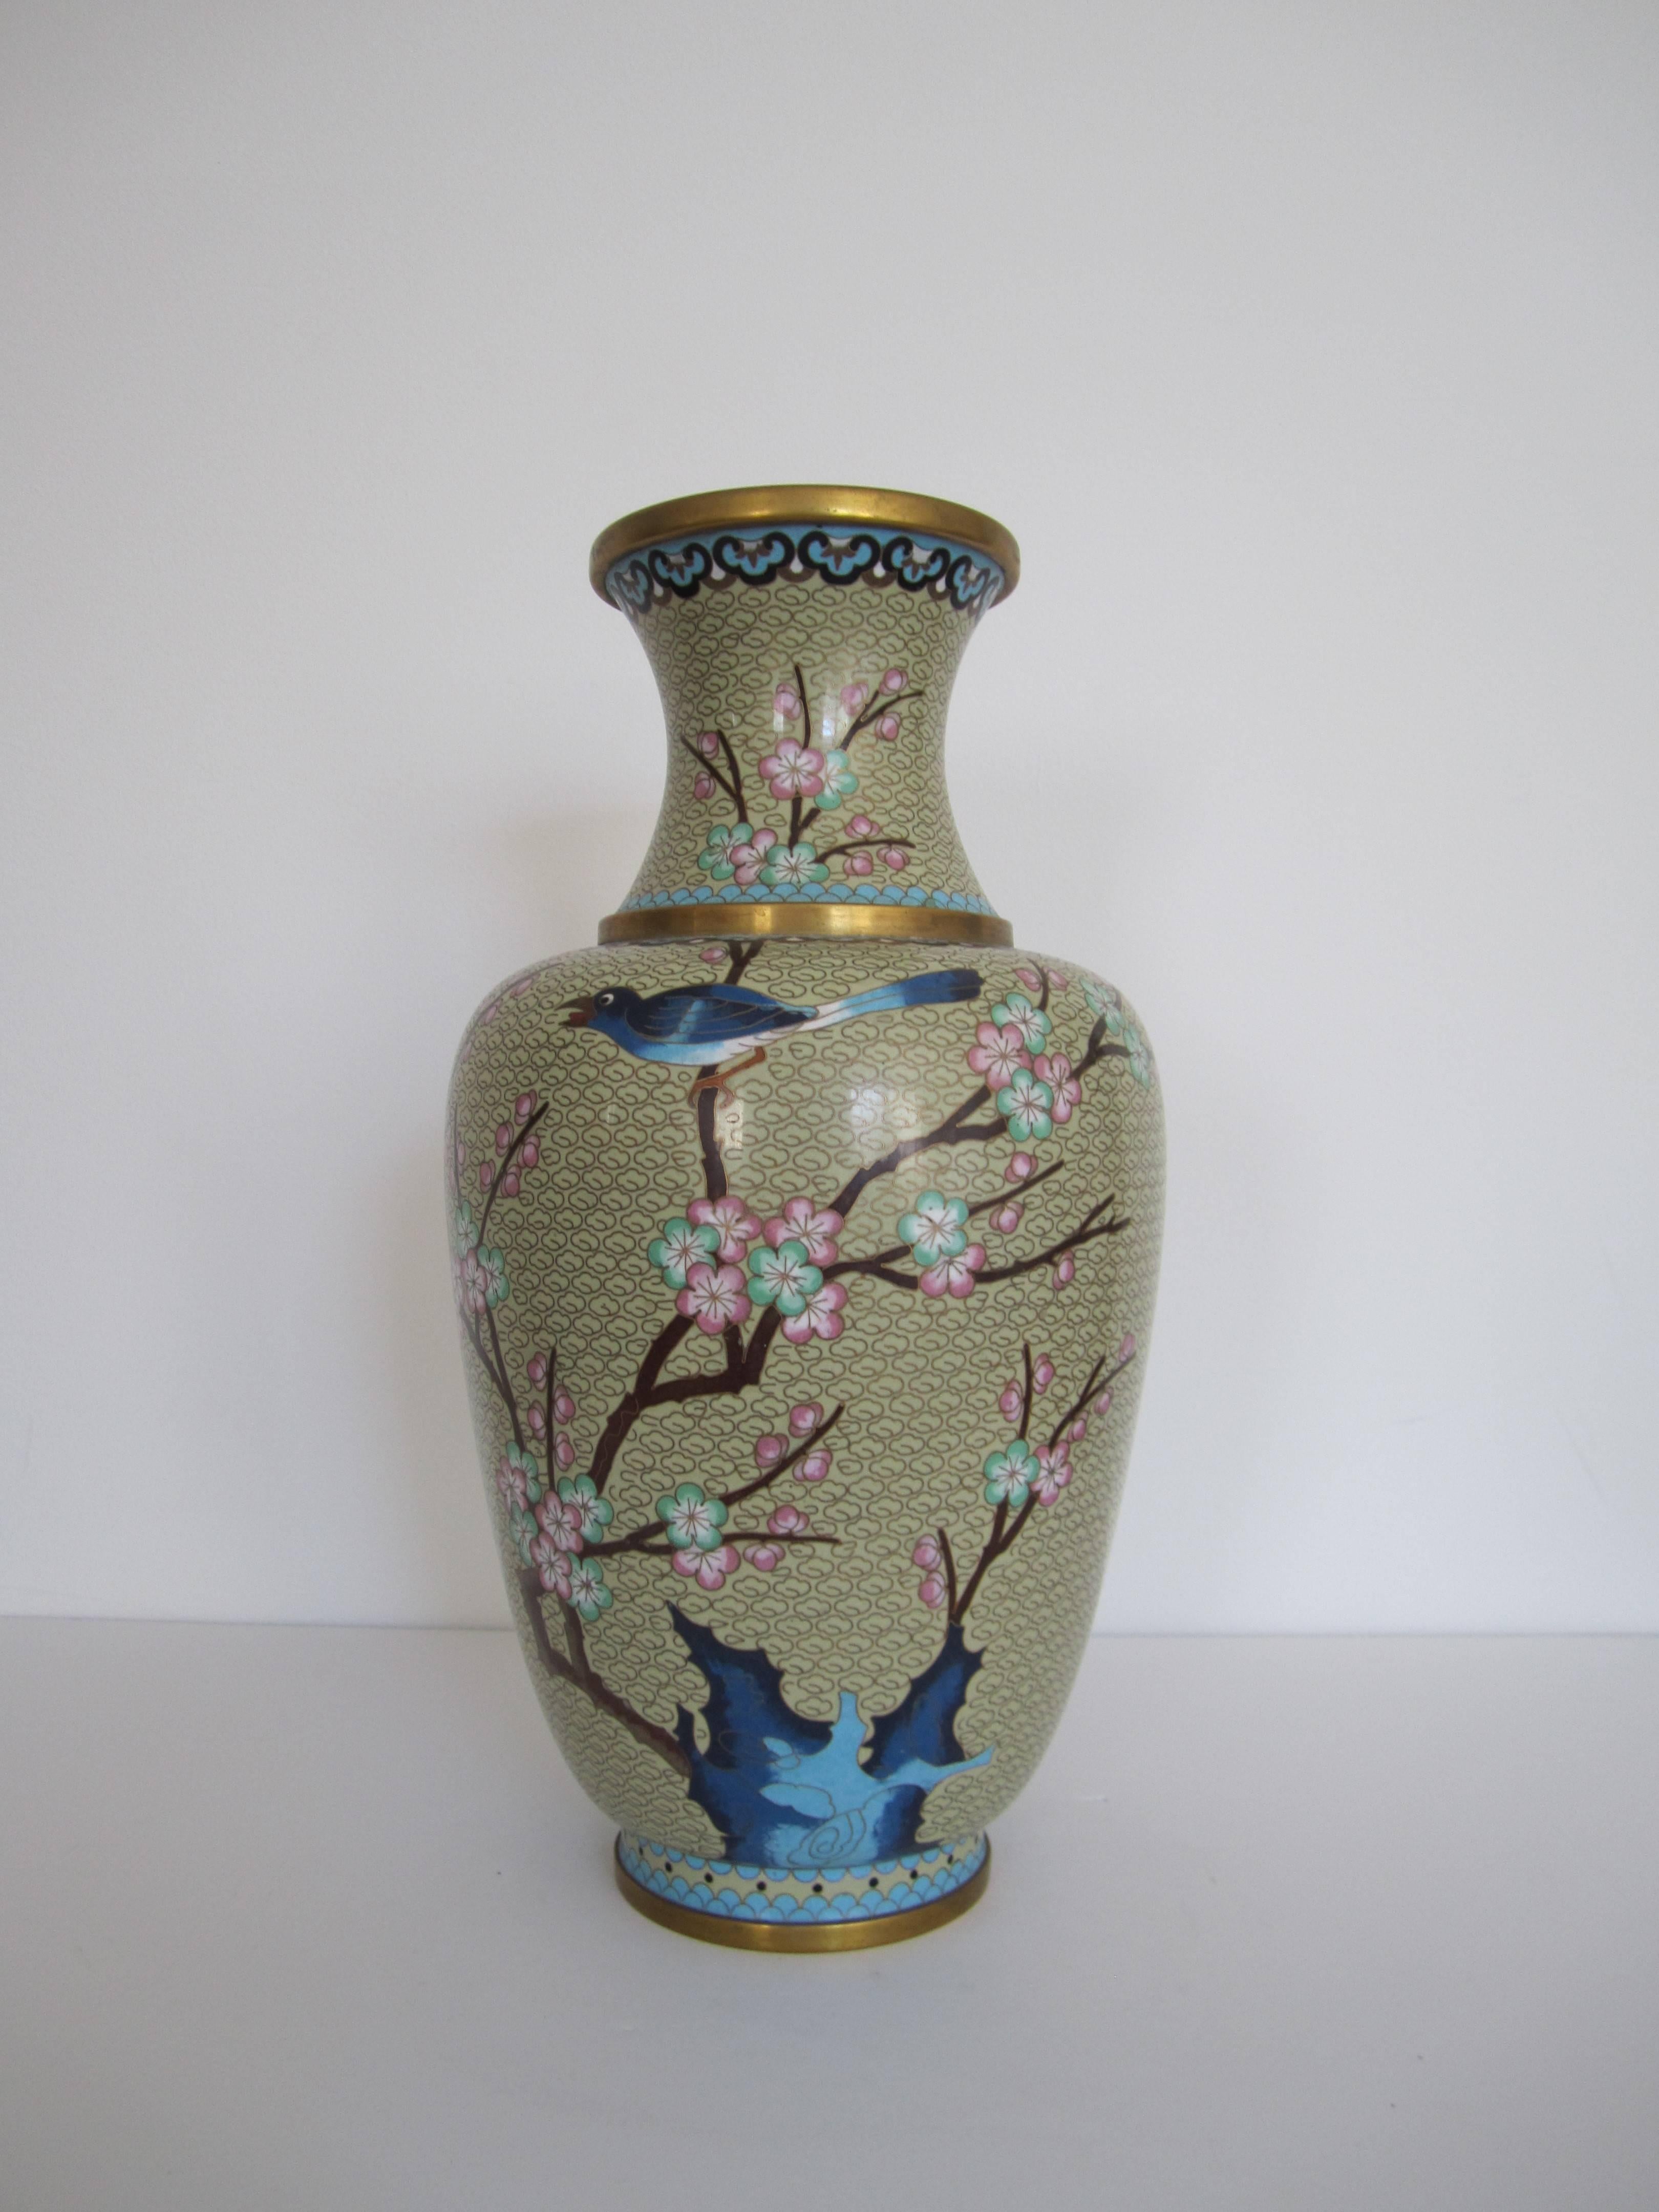 A beautiful large vintage Chinese Cloisonné vase, circa 1970s, depicting cherry blossoms and a bird perched on its branch. Colors include, blue, light blue, cream, brown, green, pink, black, etc. Measuring 15.5